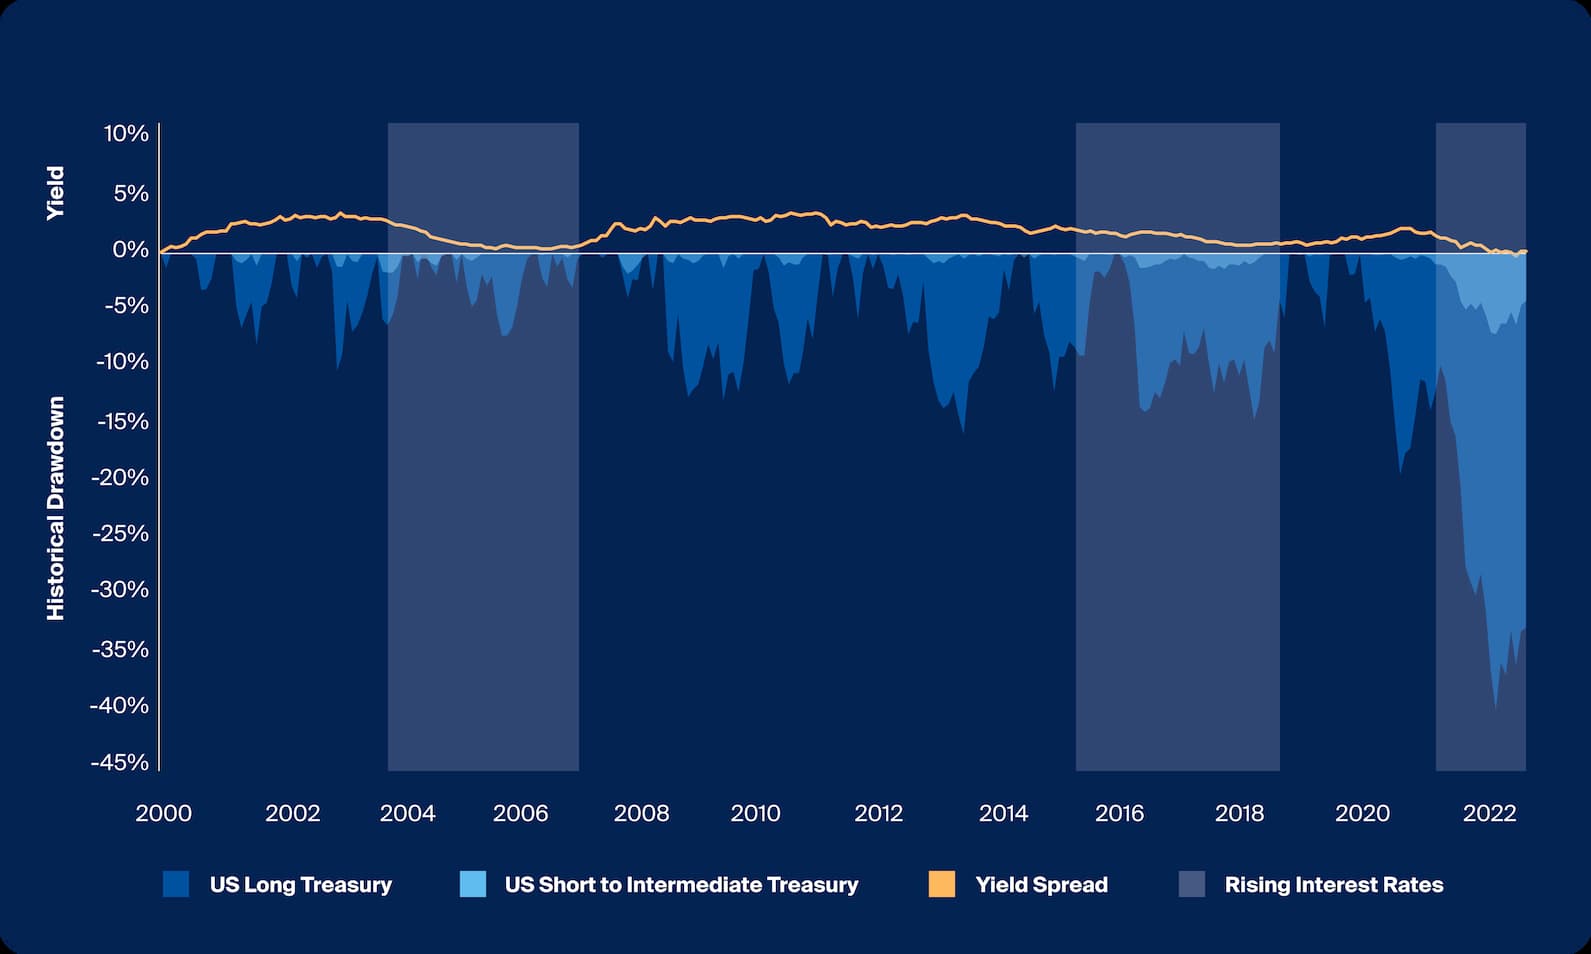 Investors benefitted from investing in longer-duration bonds but would have also experienced greater drawdowns, especially in rising-rate environments